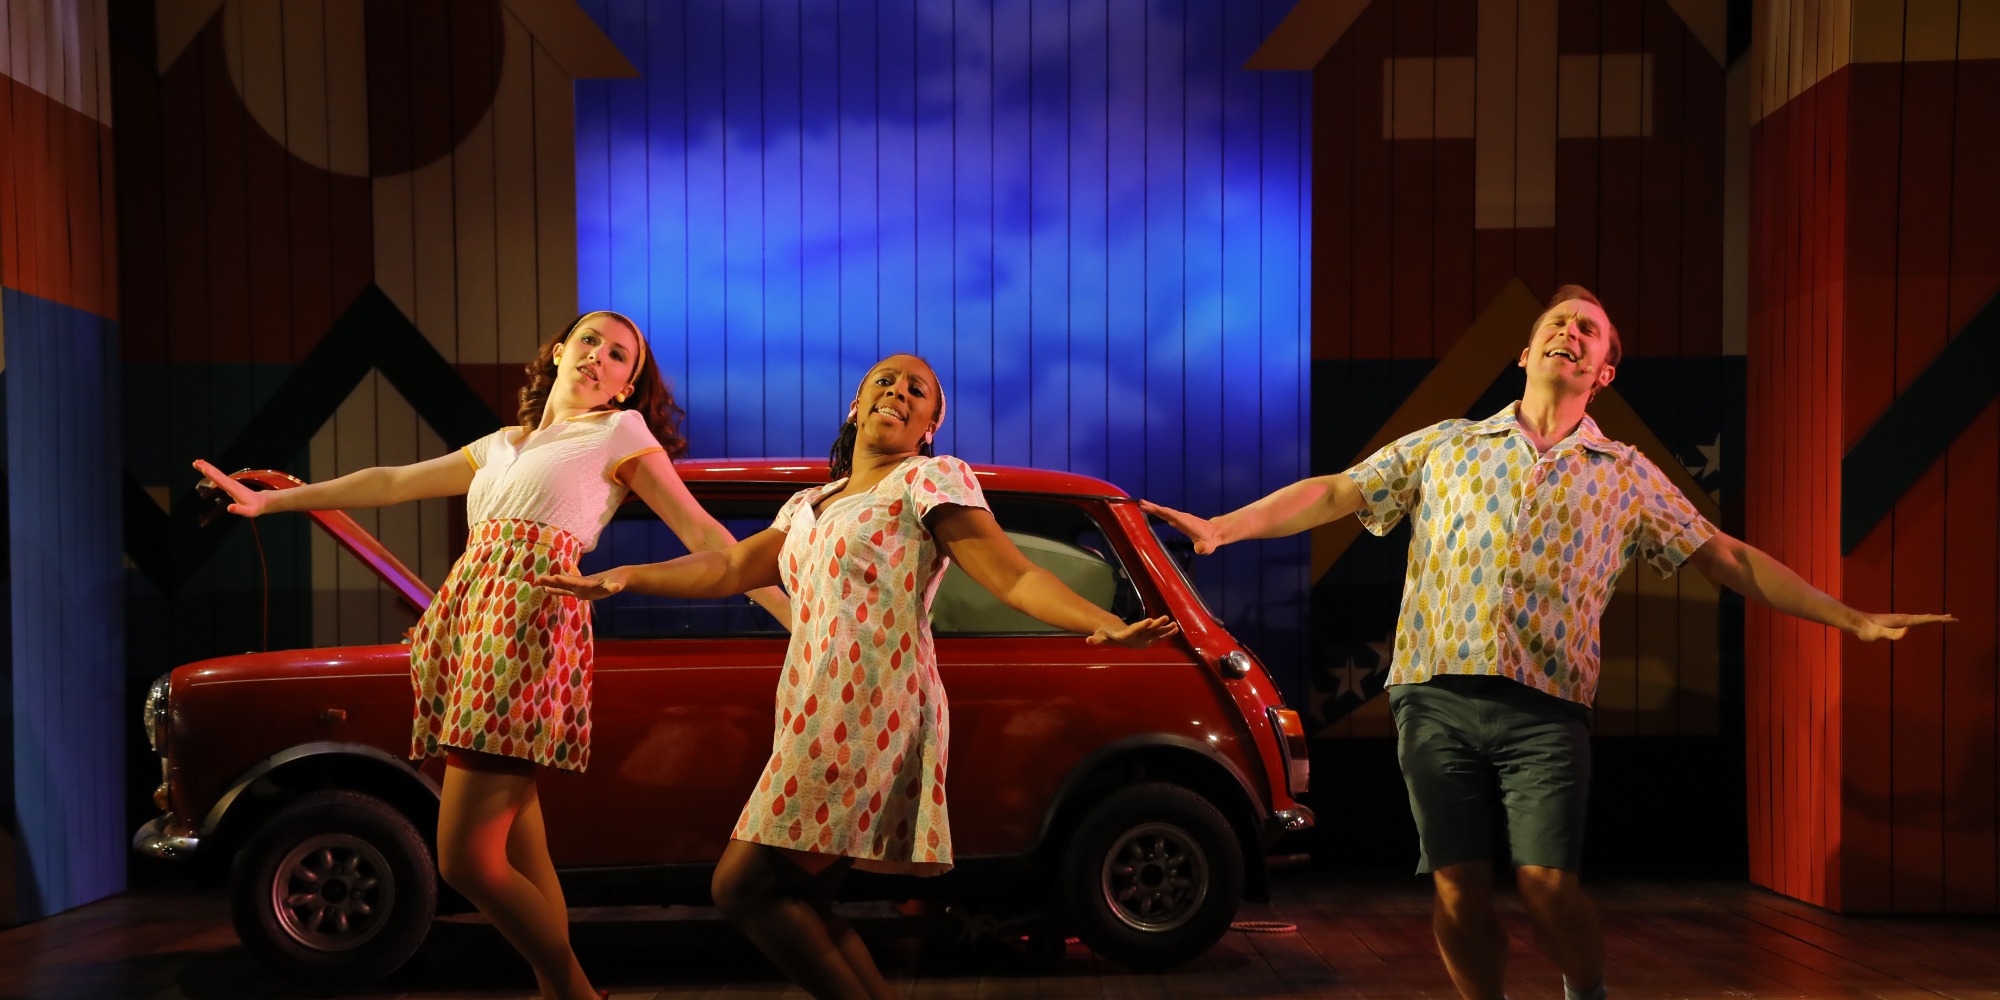 Three actors on stage all in a unified dance pose leaning back left with arms spread at their side, they are all standing in front of a red mini cooper with a blue sky design in the background